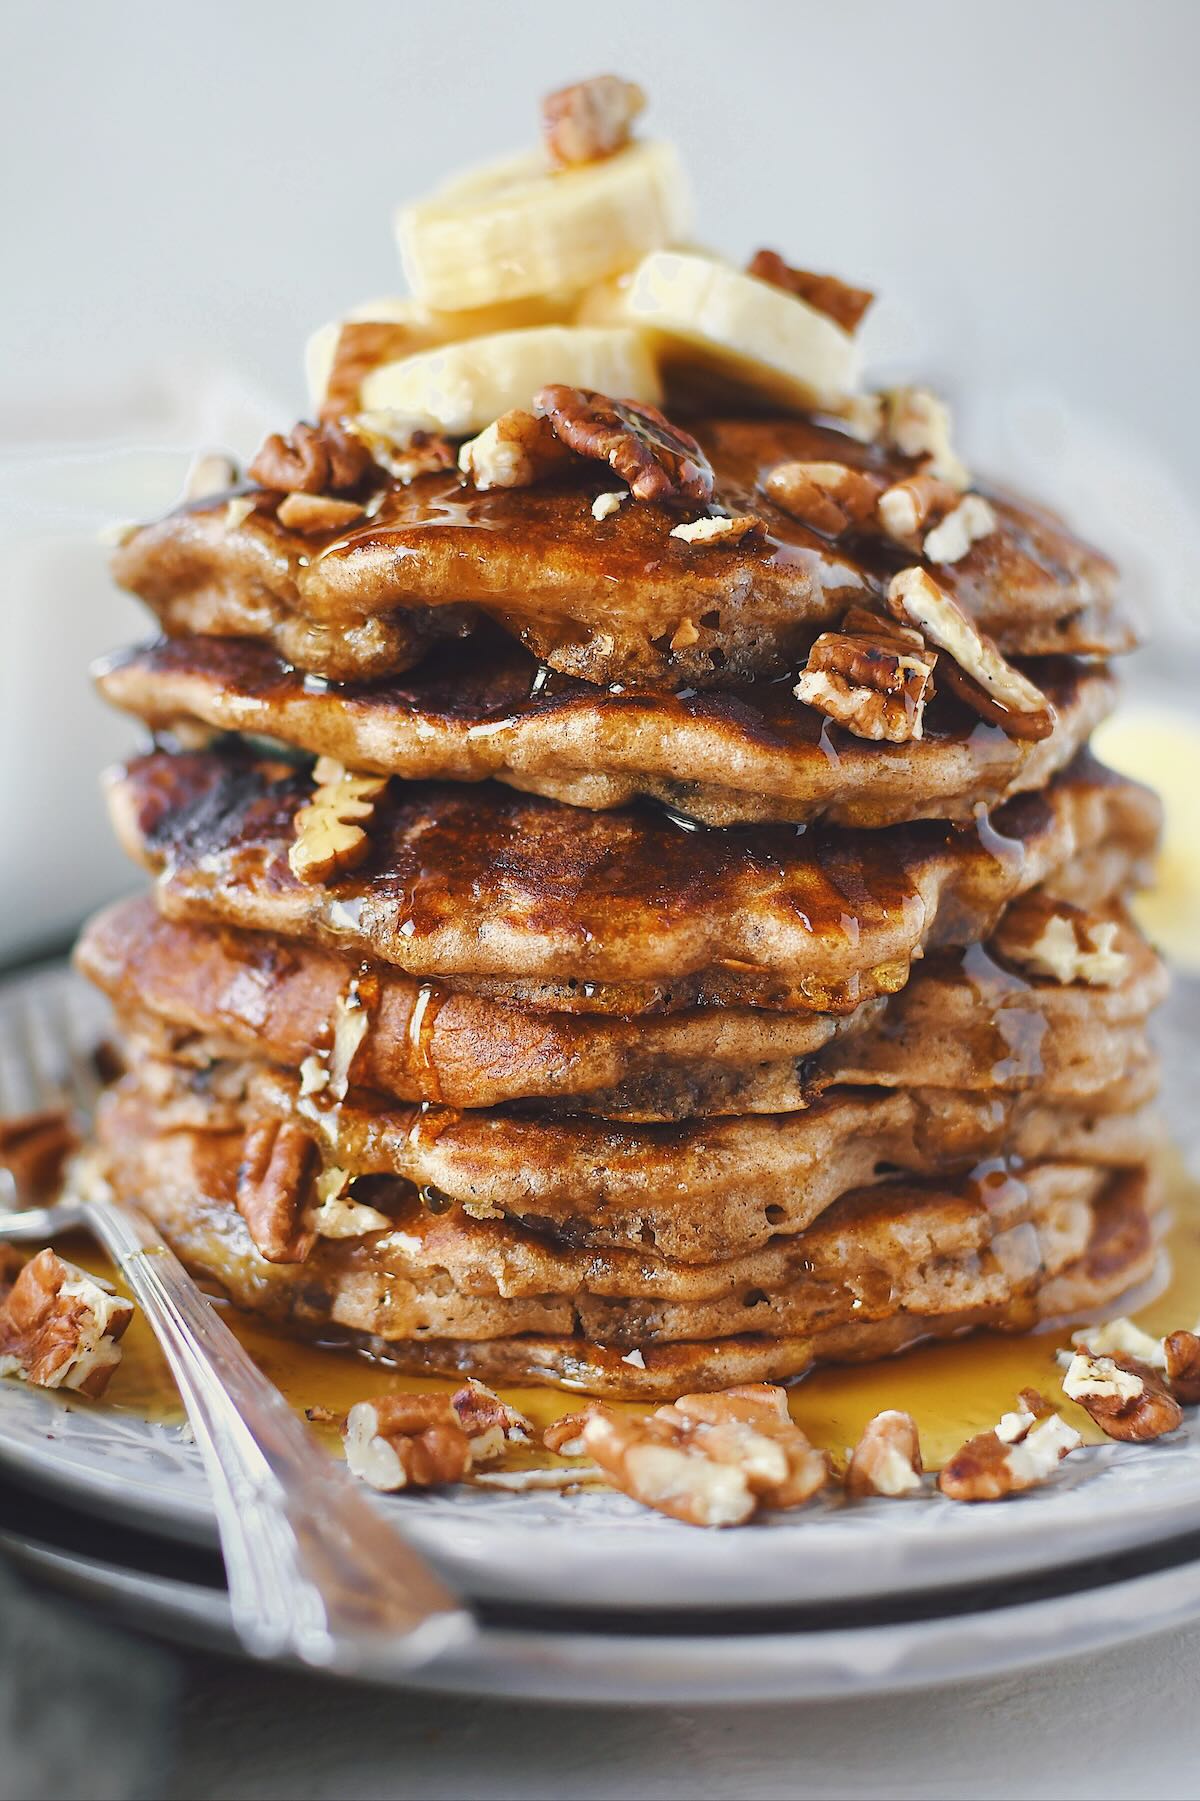 Banana Pecan Pancakes stacked high, topped with banana slices and more chopped toasted pecans.